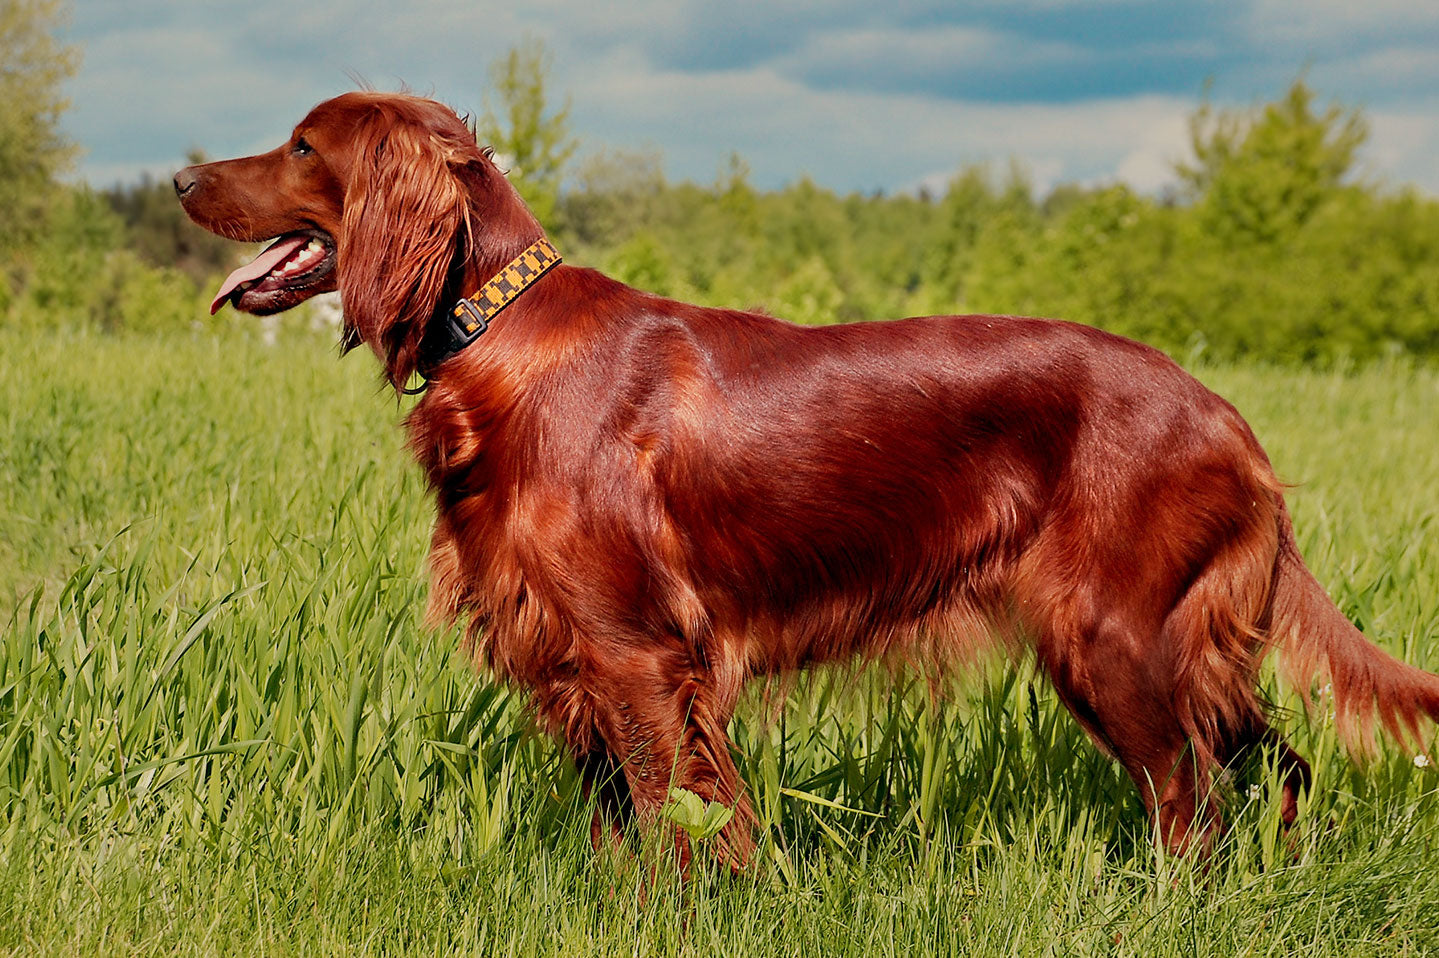 shiny red long haired dog standing in grassy field panting